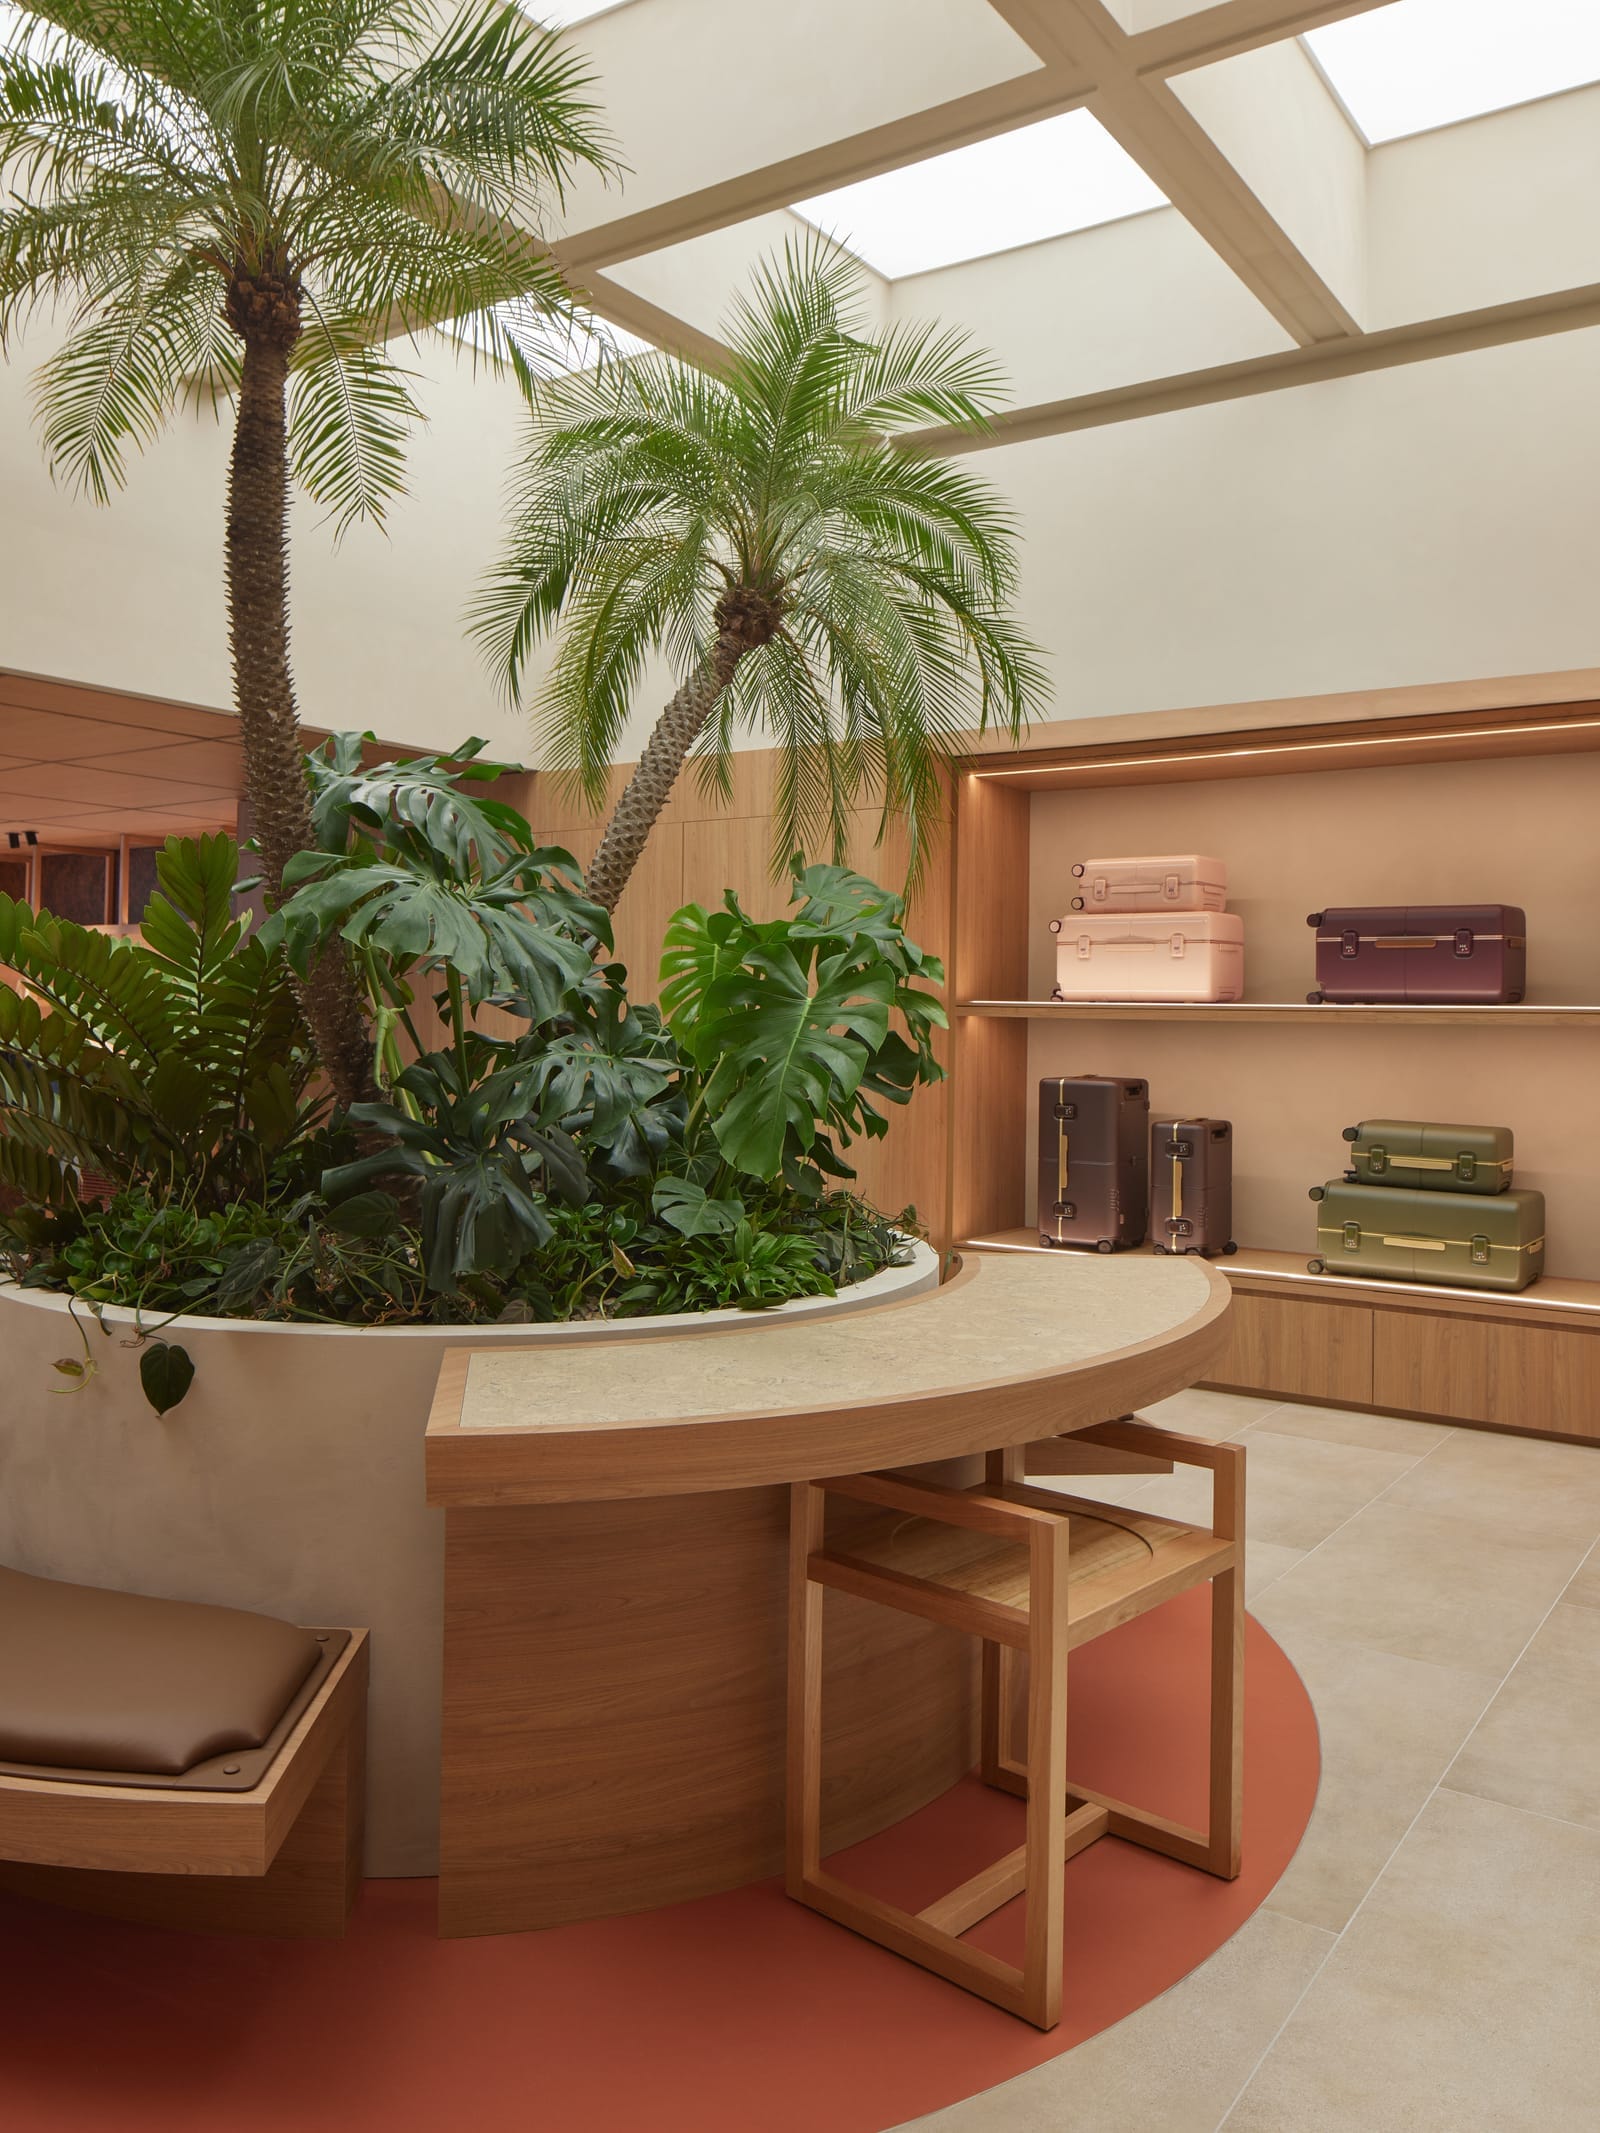 Acre Ventures into Lifestyle Retail with a Tropical Installation for July Luggage